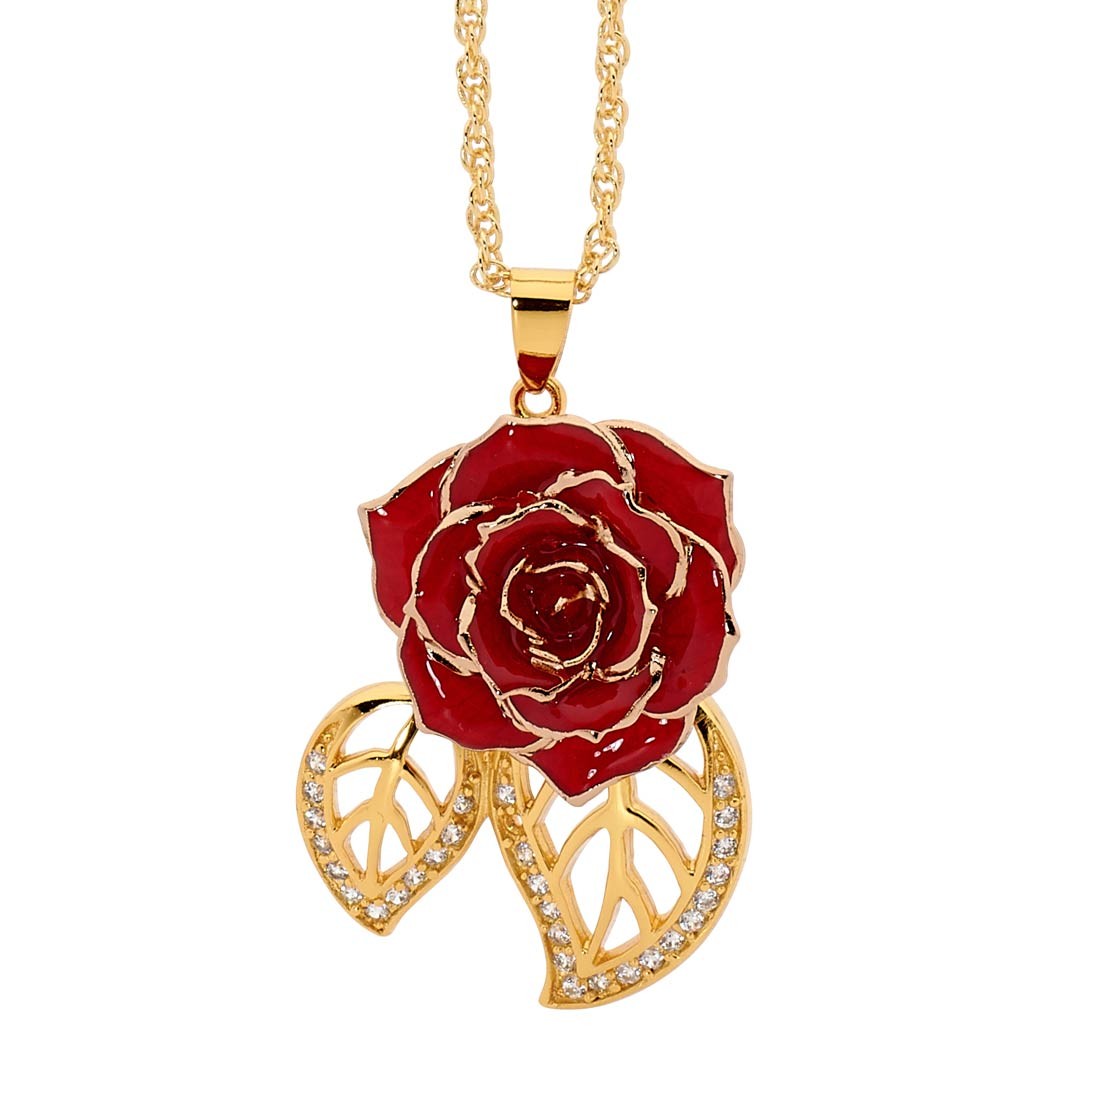 Gold Dipped Rose & Red Matched Jewelry Set in Leaf Theme